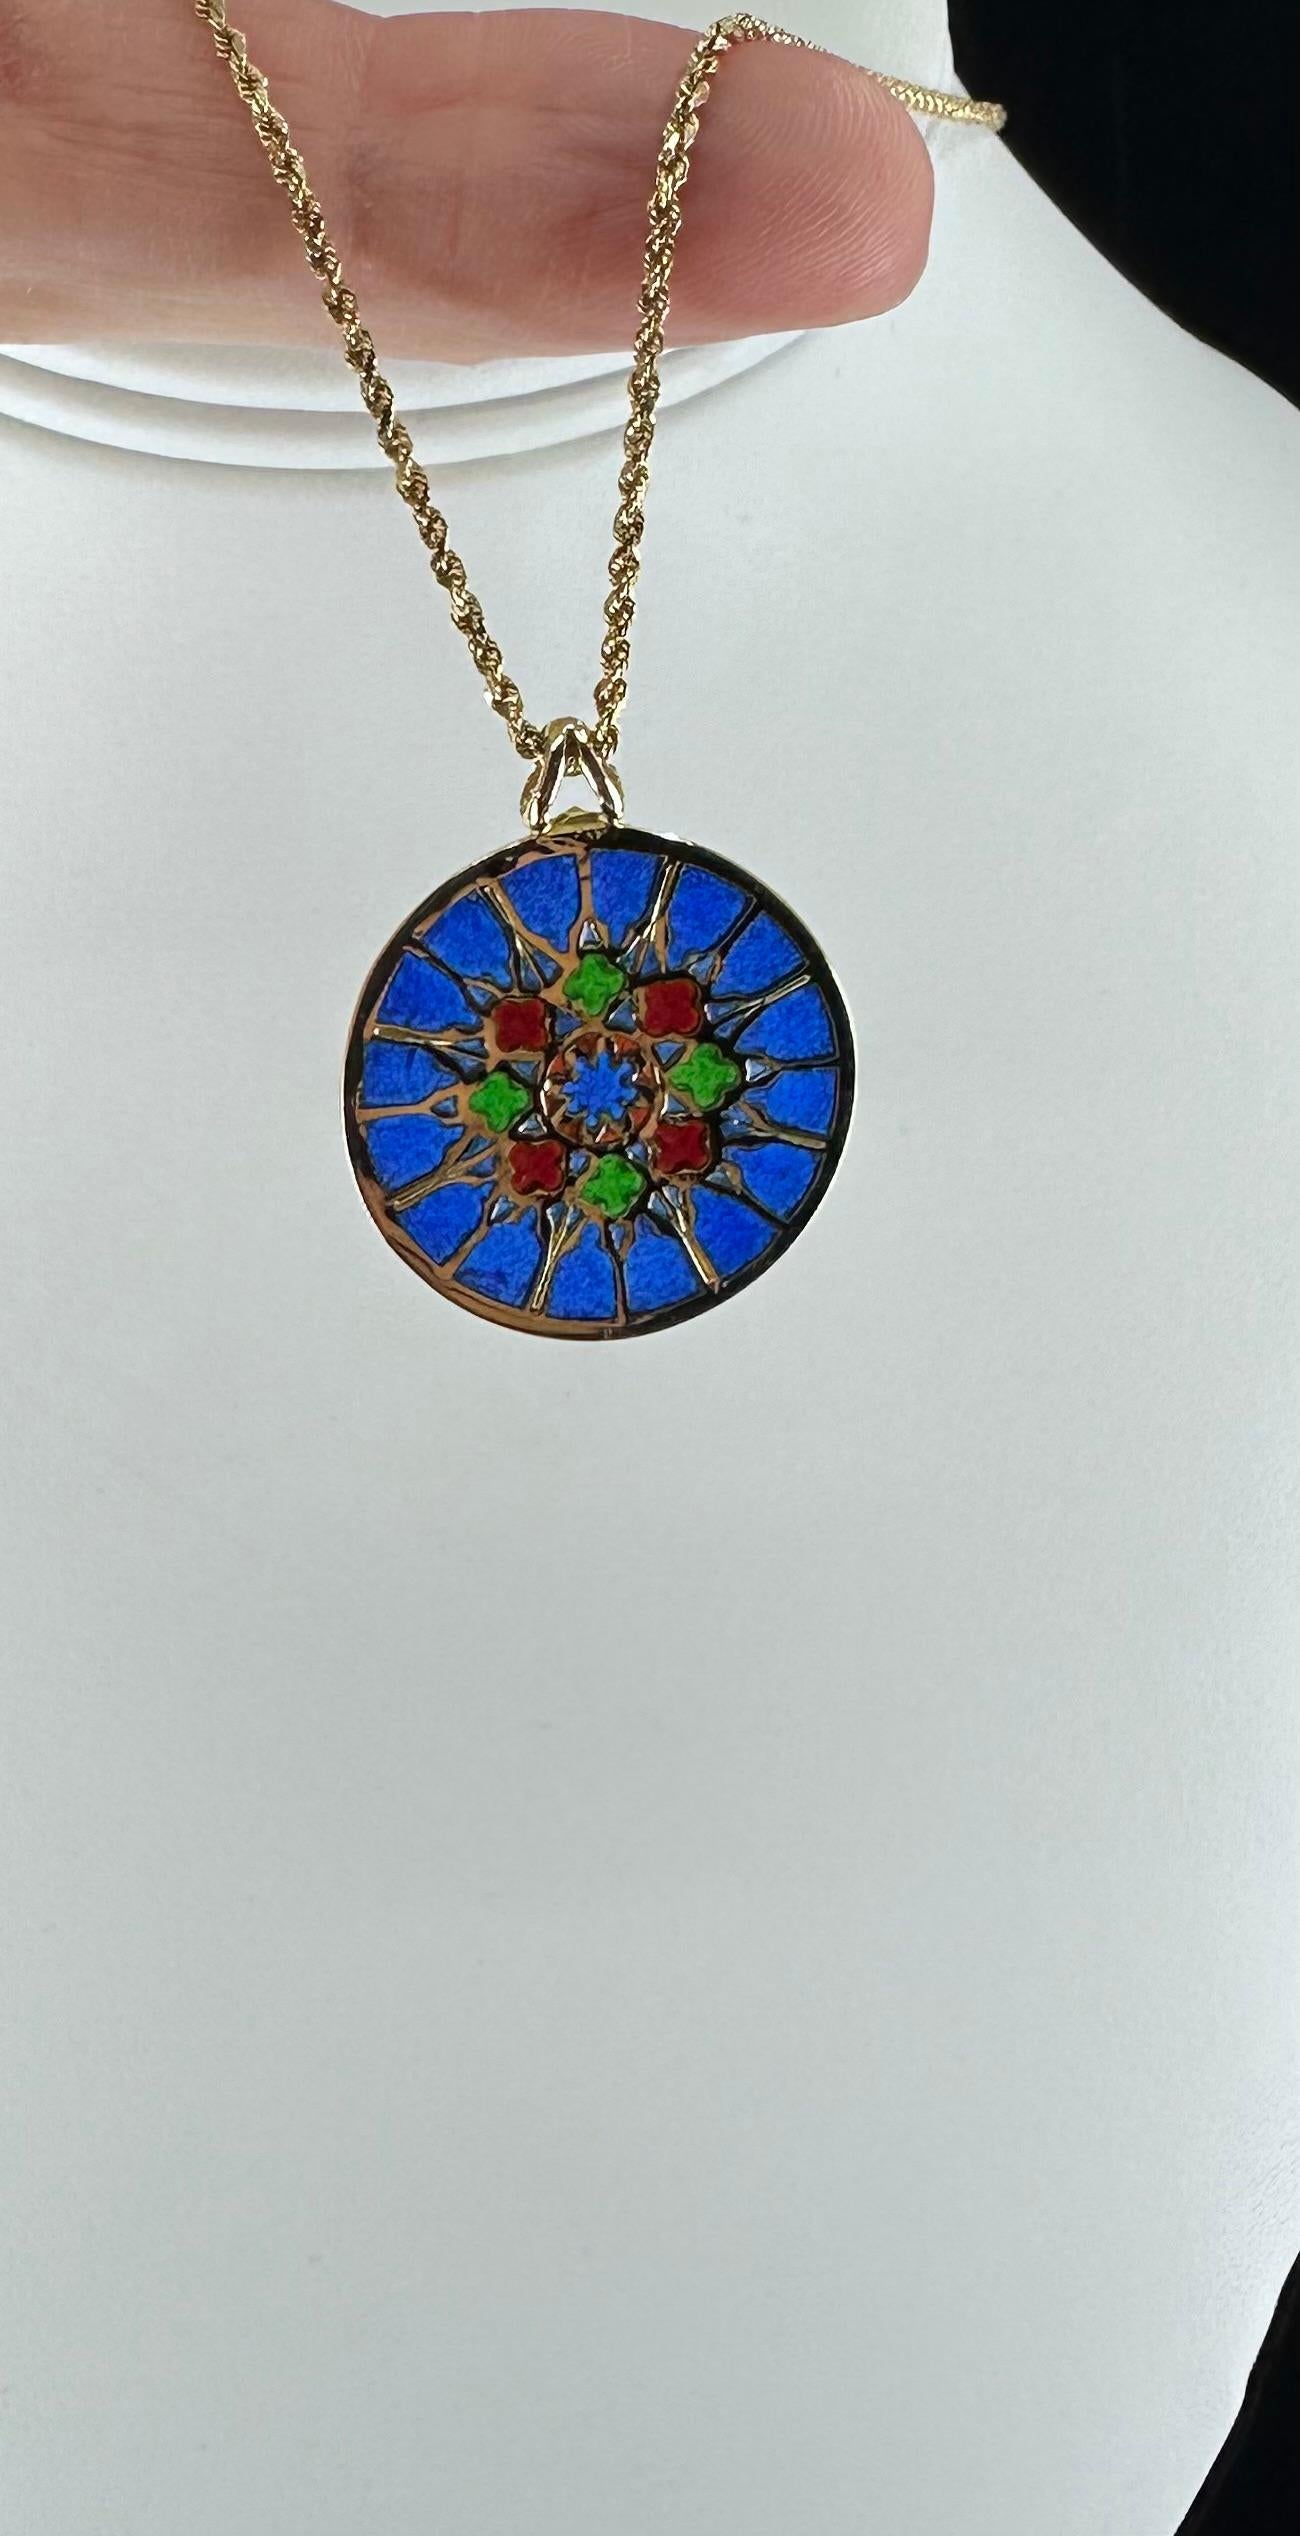 French Enamel Medallion Hallmarked with French Eagles Head, Workshop Stamp and 750 on 14k Rope Chain 20 inch.
Recalling the Stained Glass Windows of the Notre Dame Cathedral in Paris. The Plique A Jour Enamels displays a vibrant Blue, Green and Red